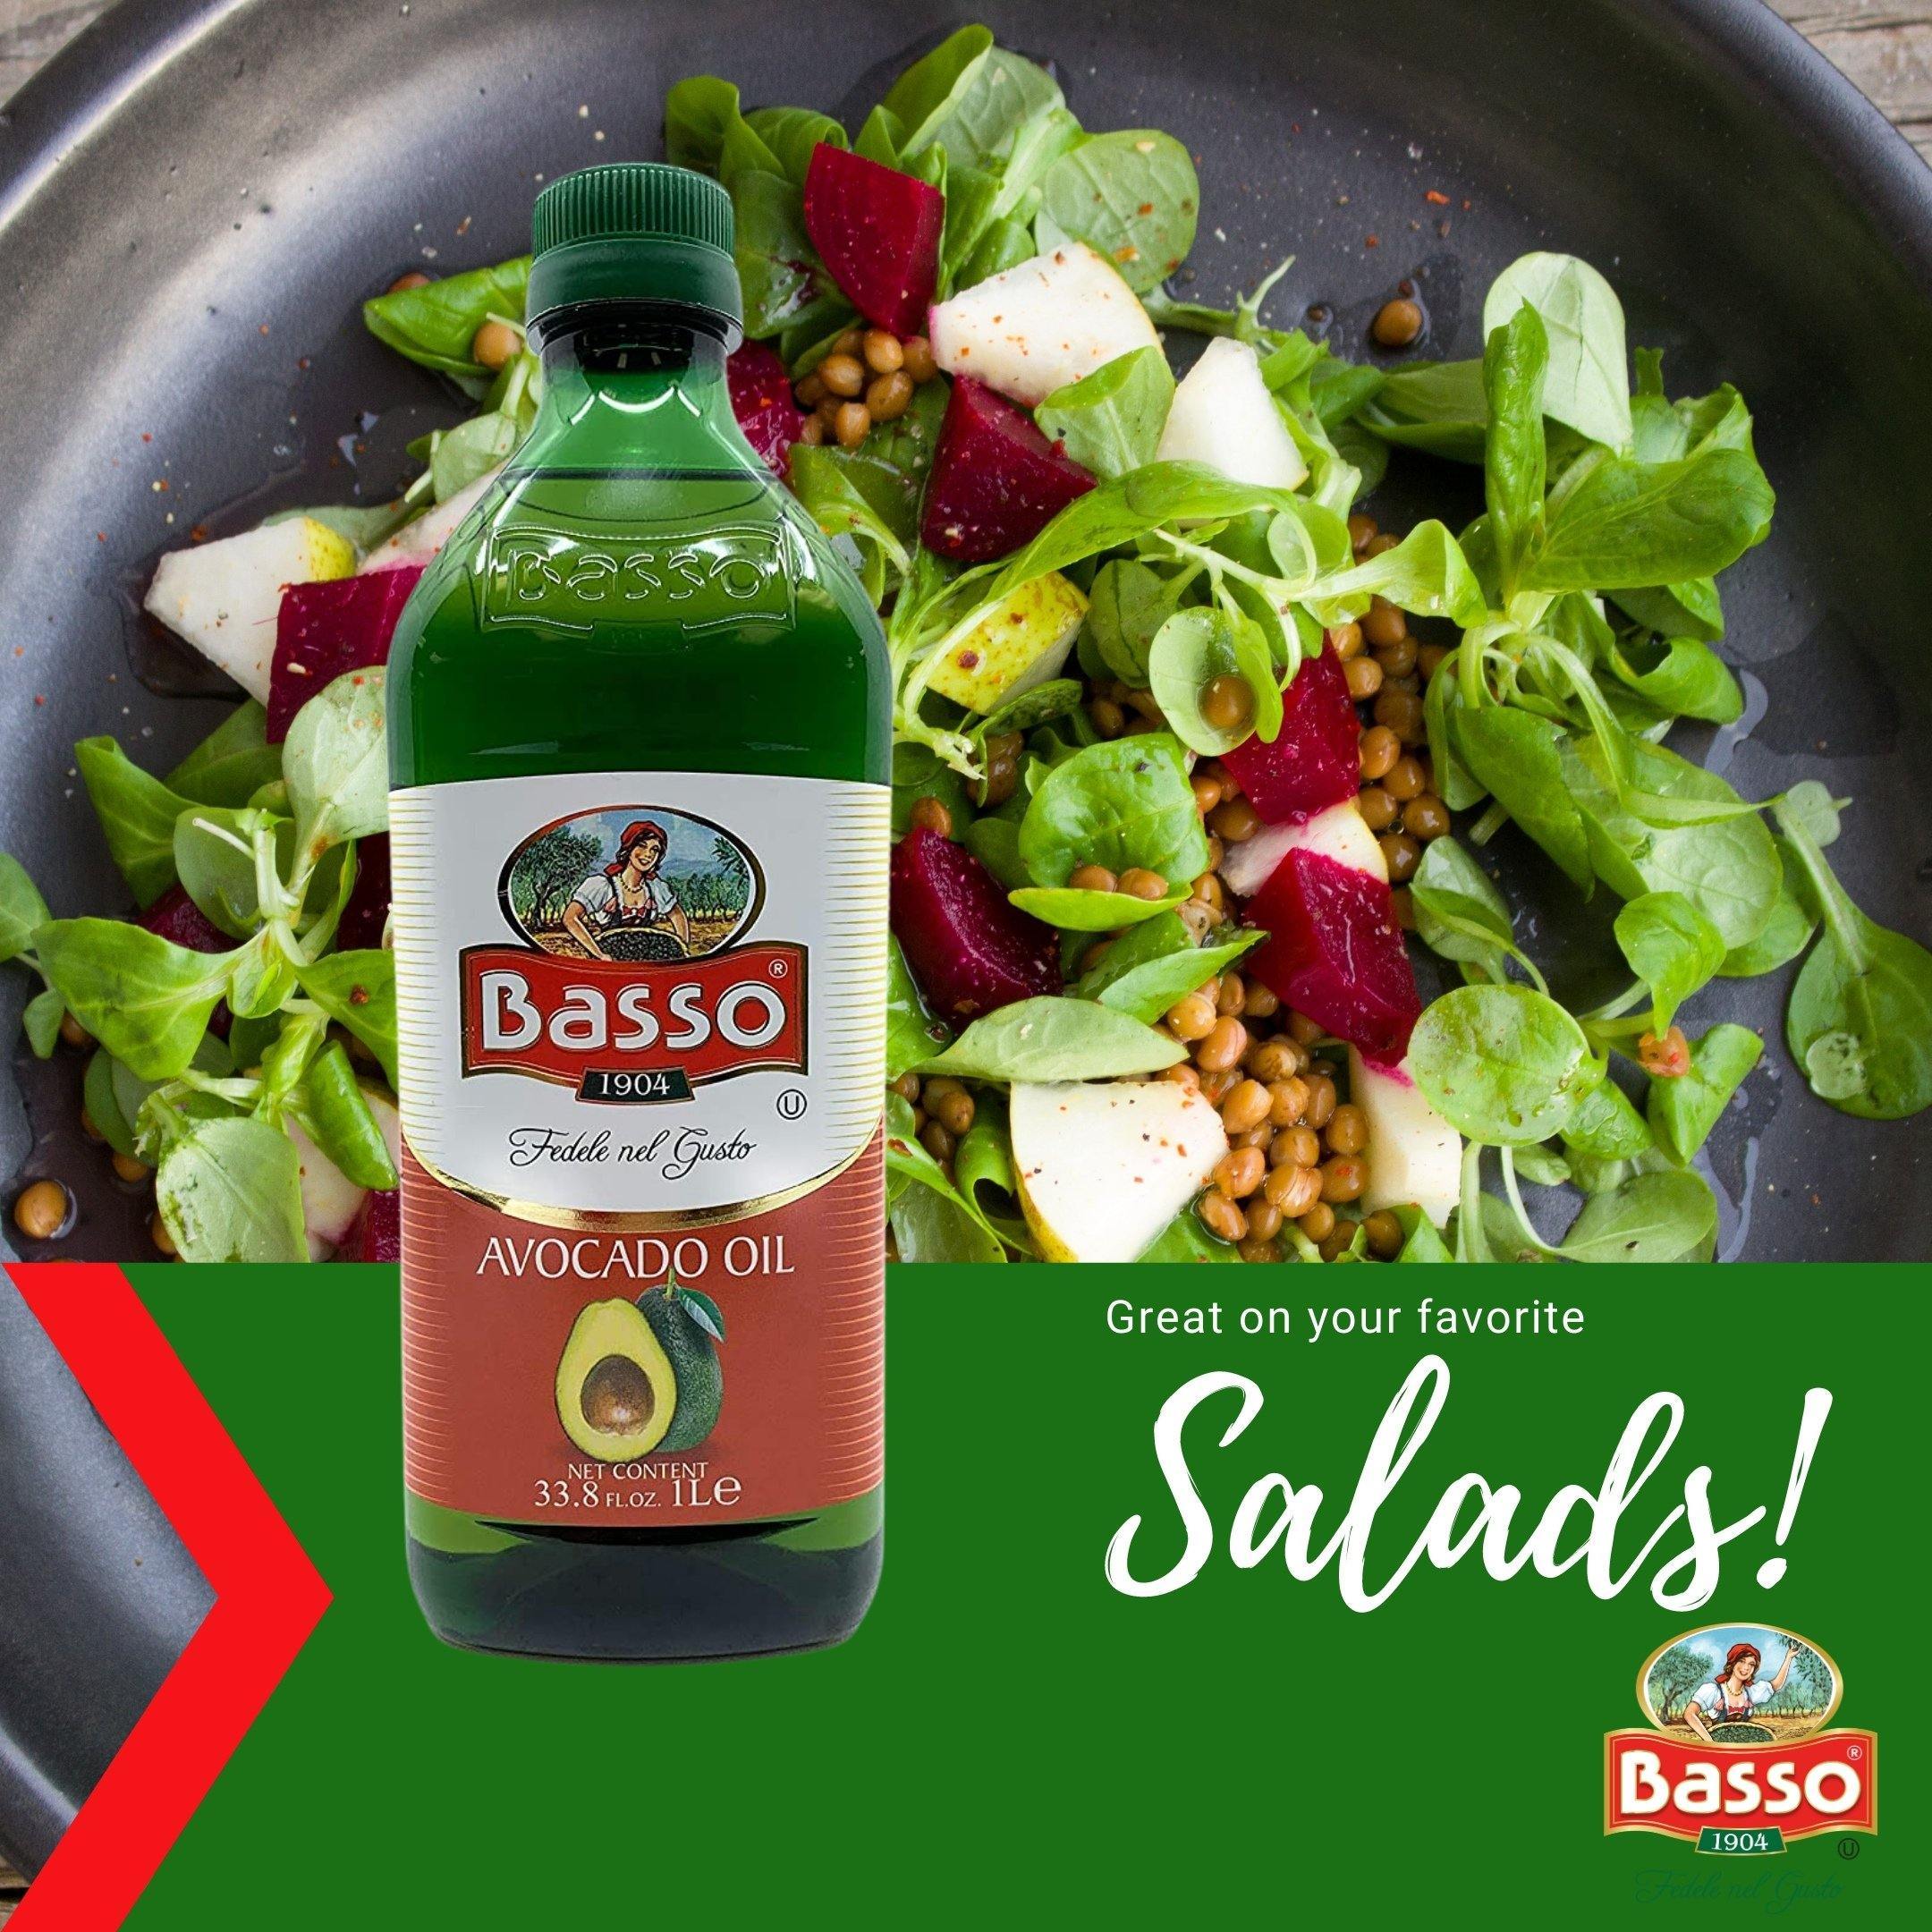 Great for Salads, Pasta and More!